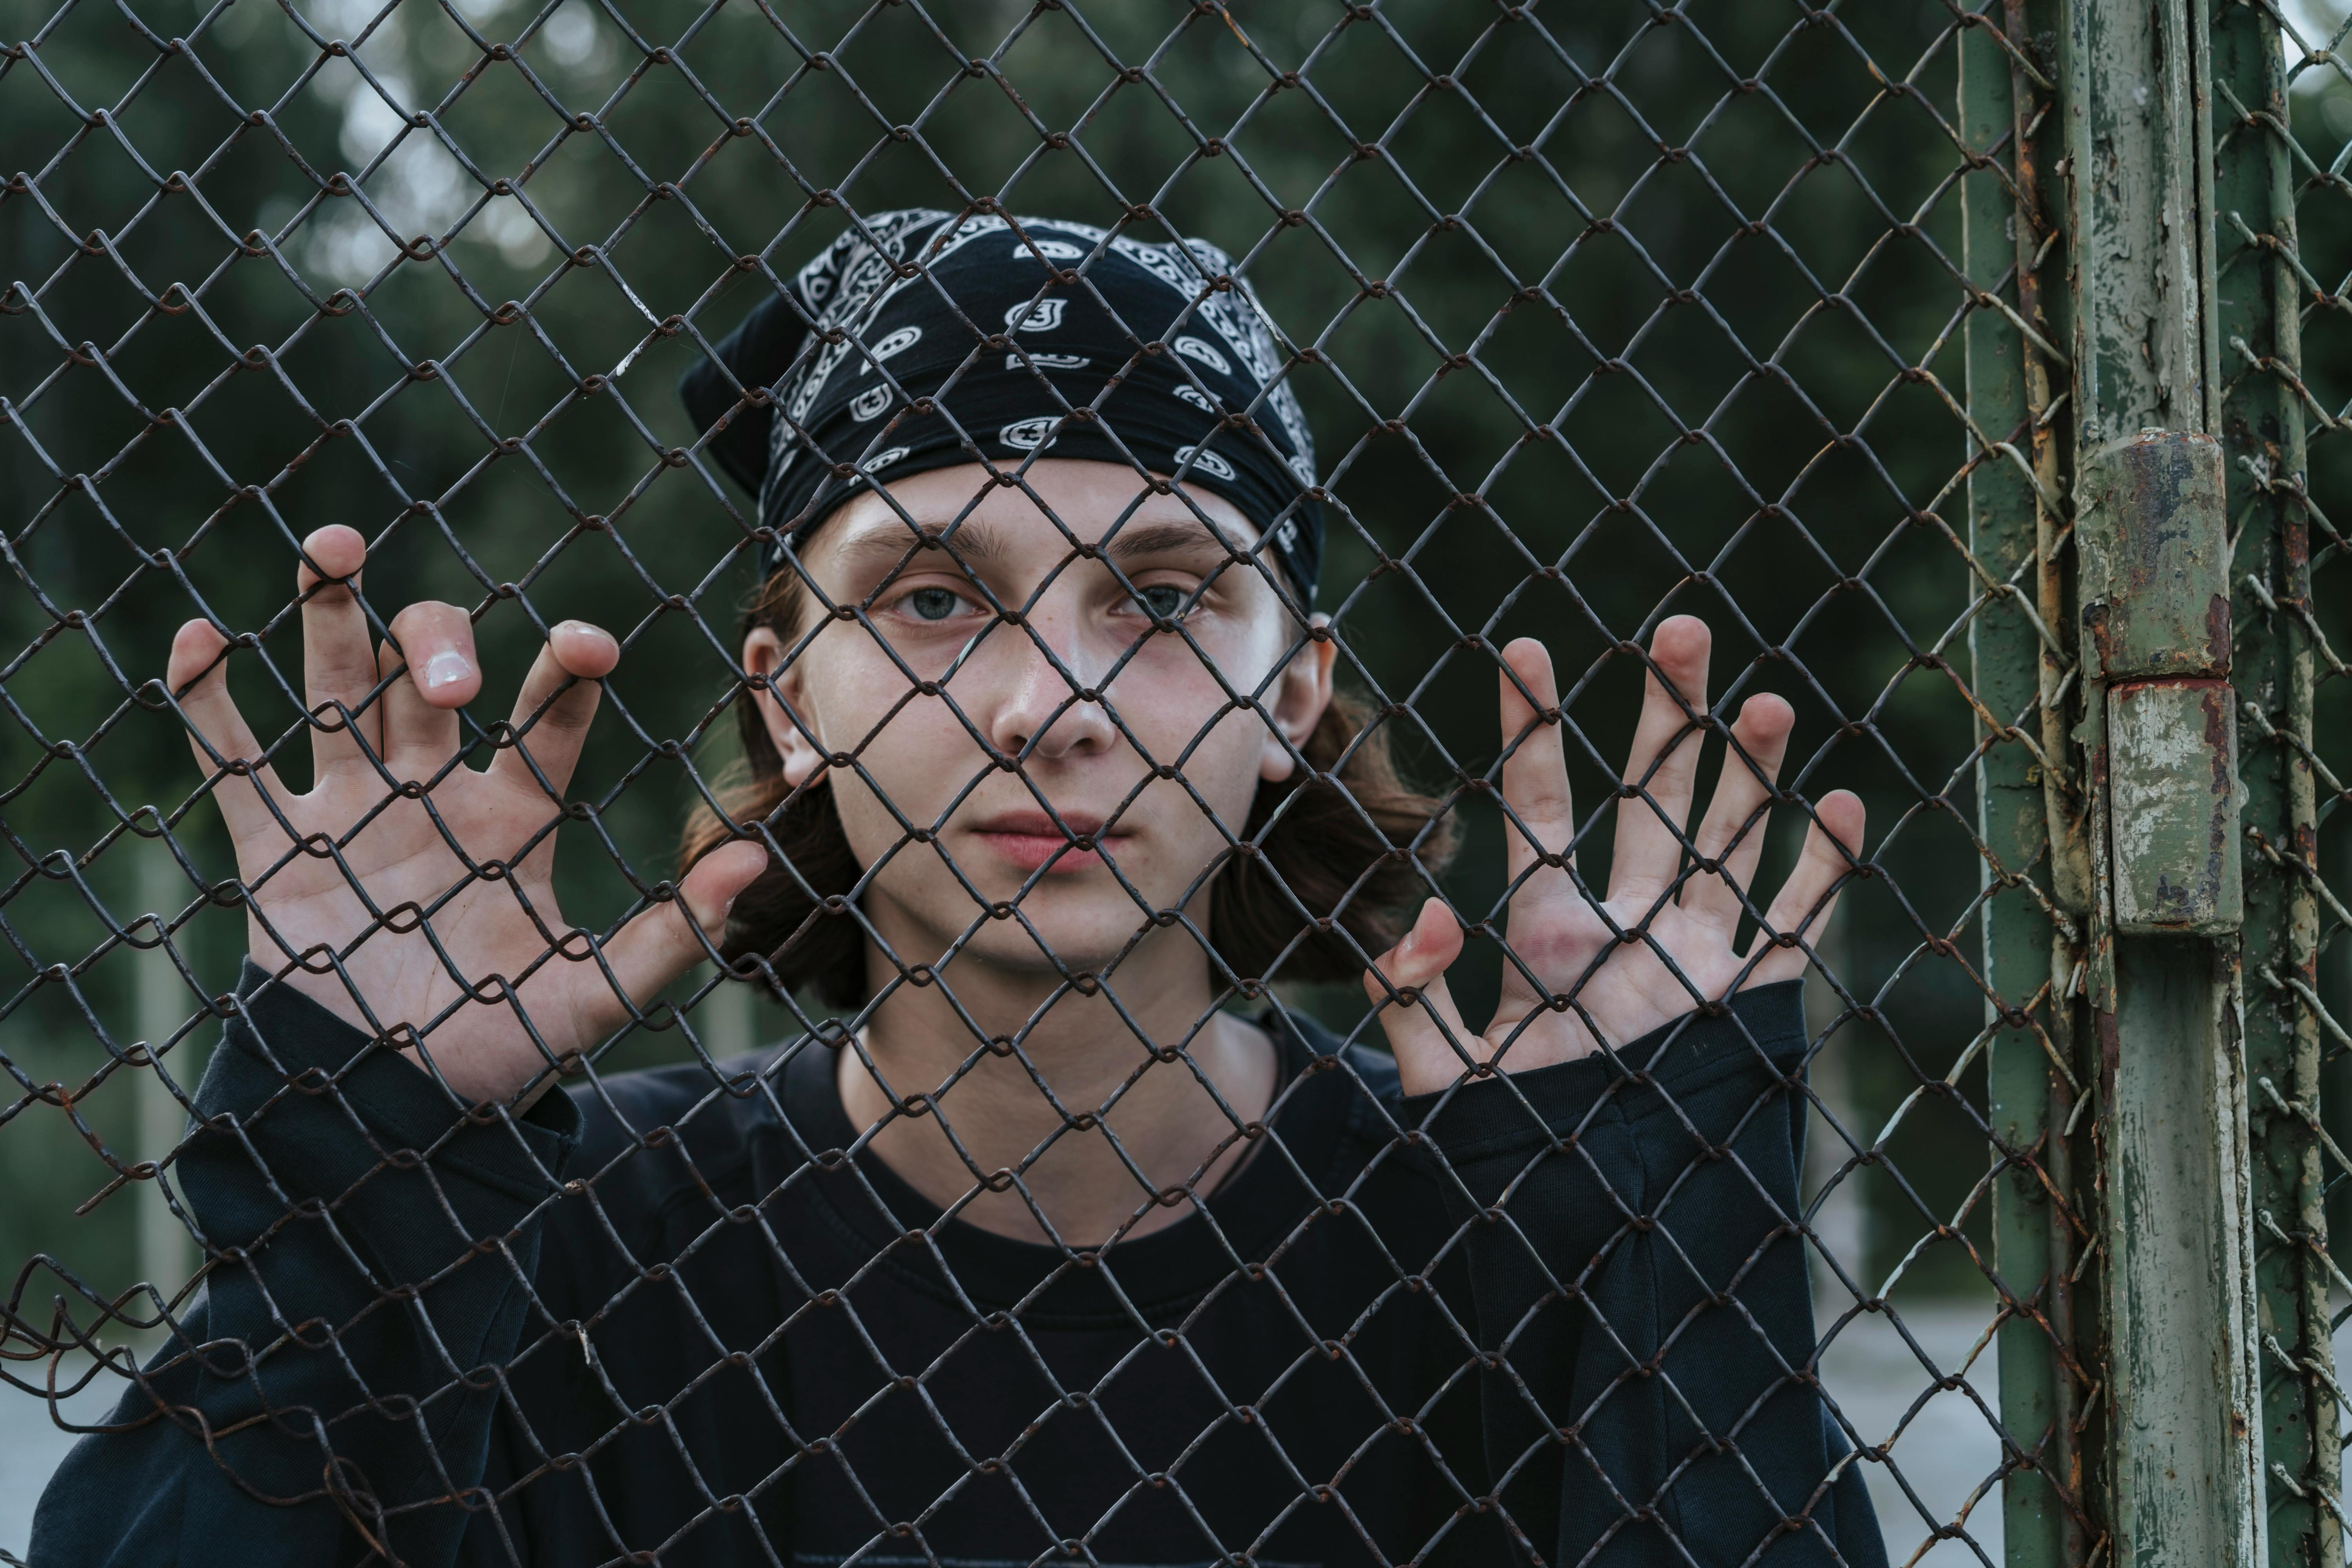 young boy wearing a bandana behind the fence